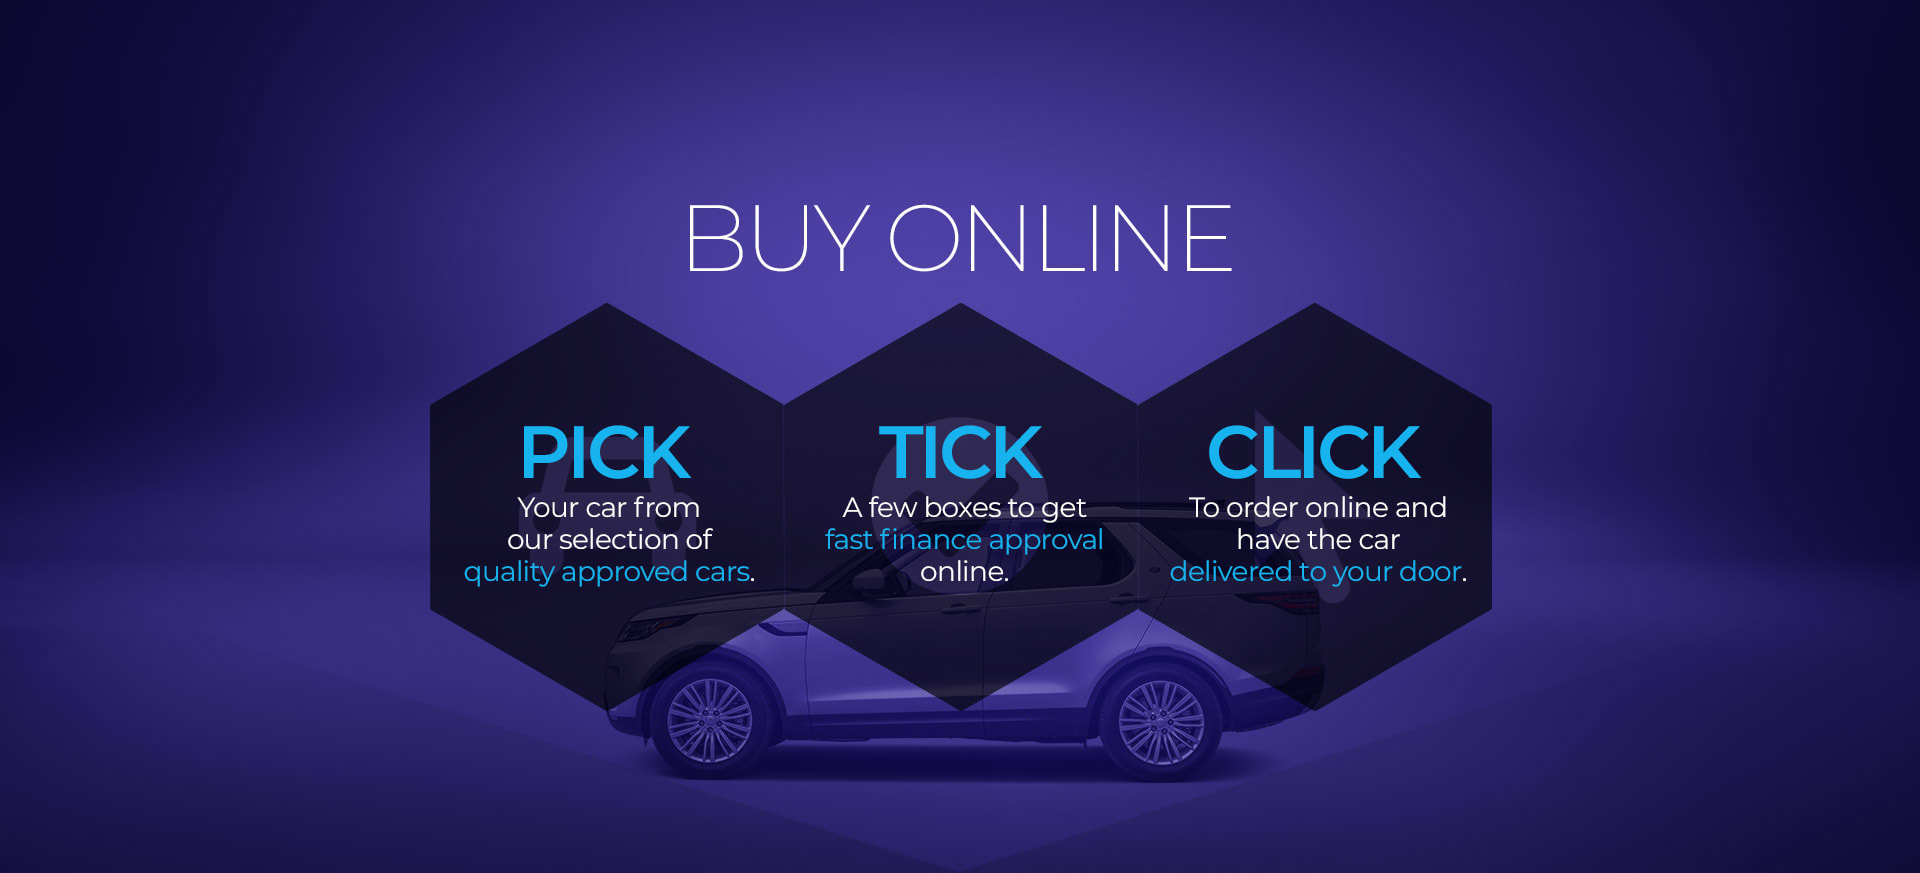 Buying cars online